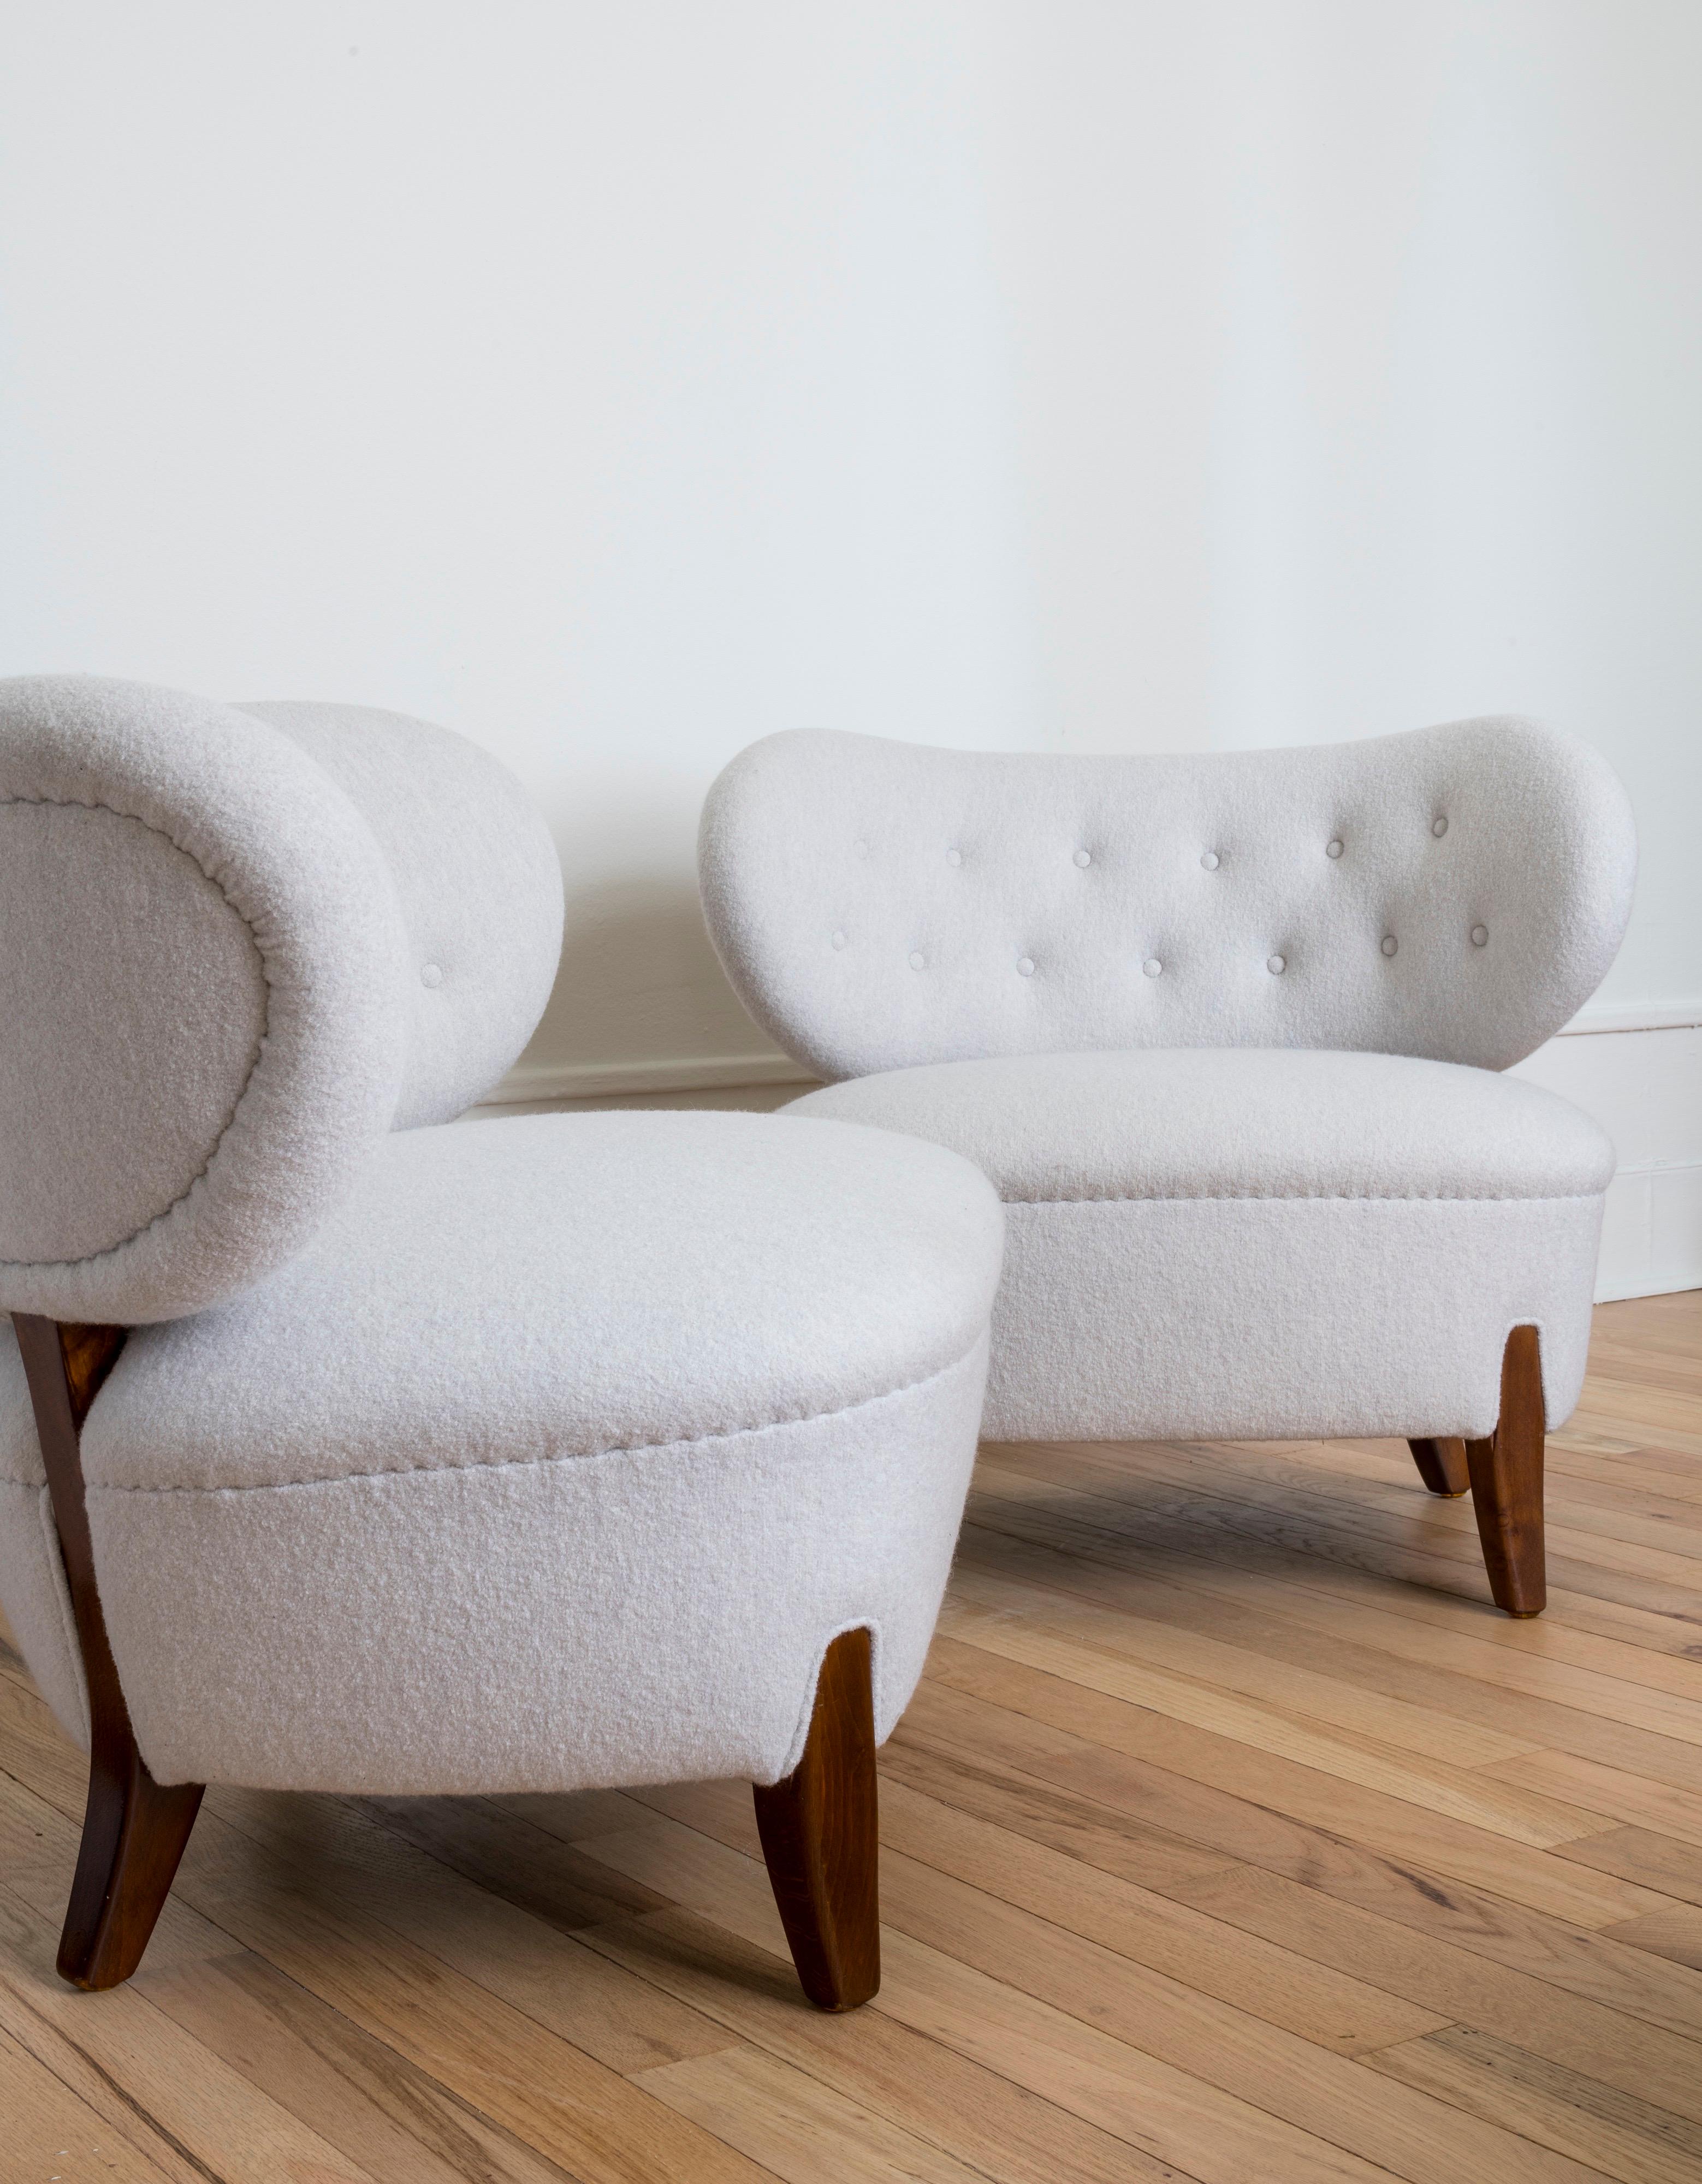 Pair of easy chairs designed by Otto Schulz in 1936 (1882-1970) and produced by Boet

Seat and back are newly upholstered in wool

Made in Sweden.